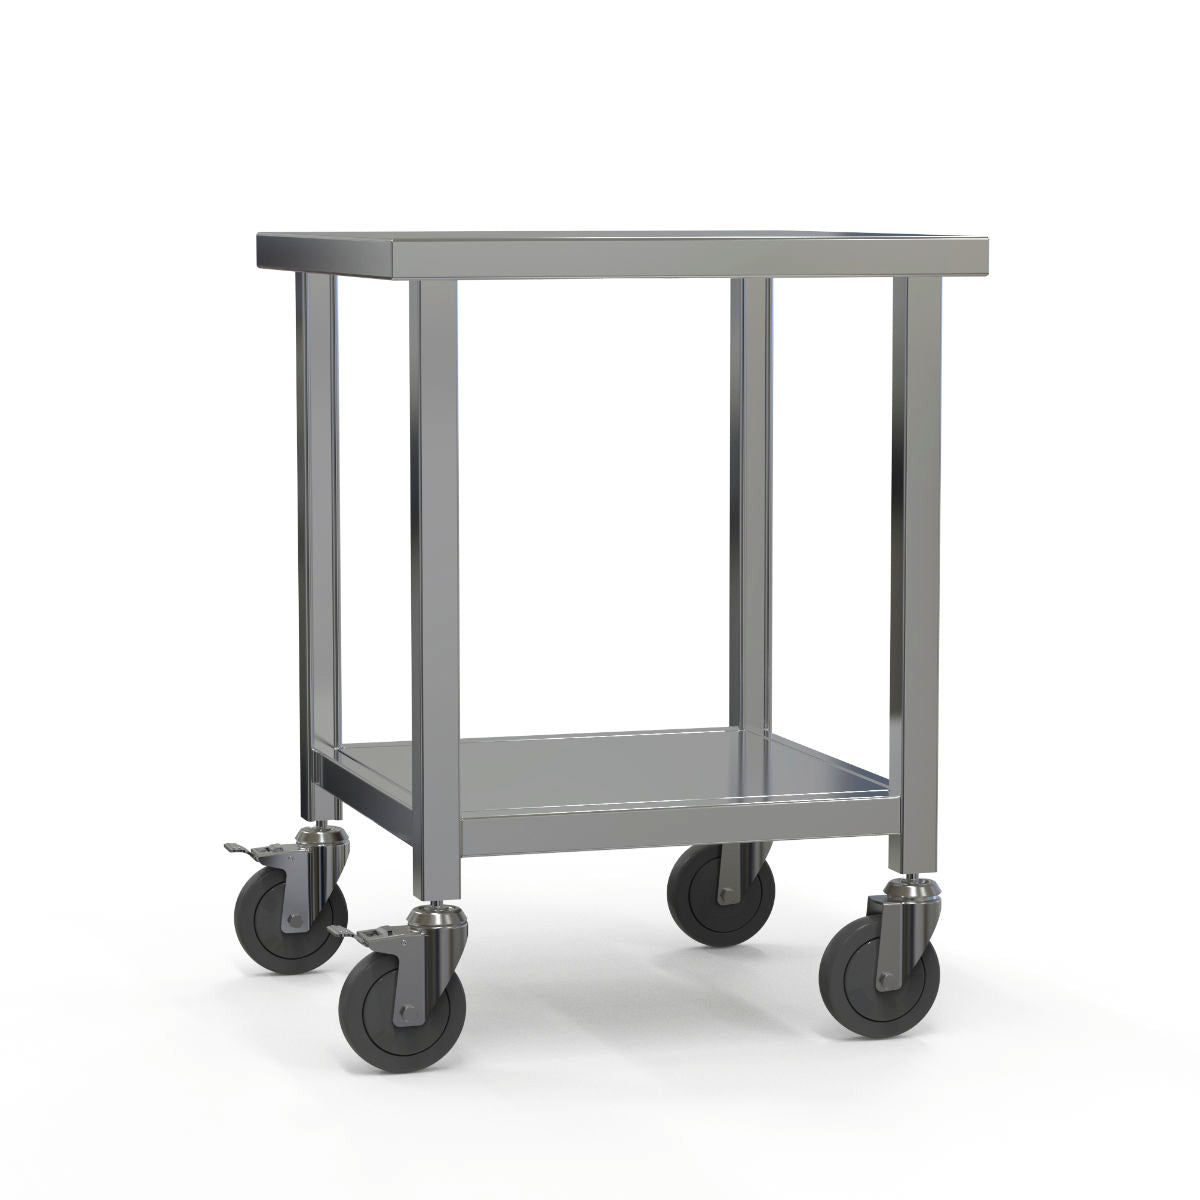 Stainless steel brewing table with wheels. 